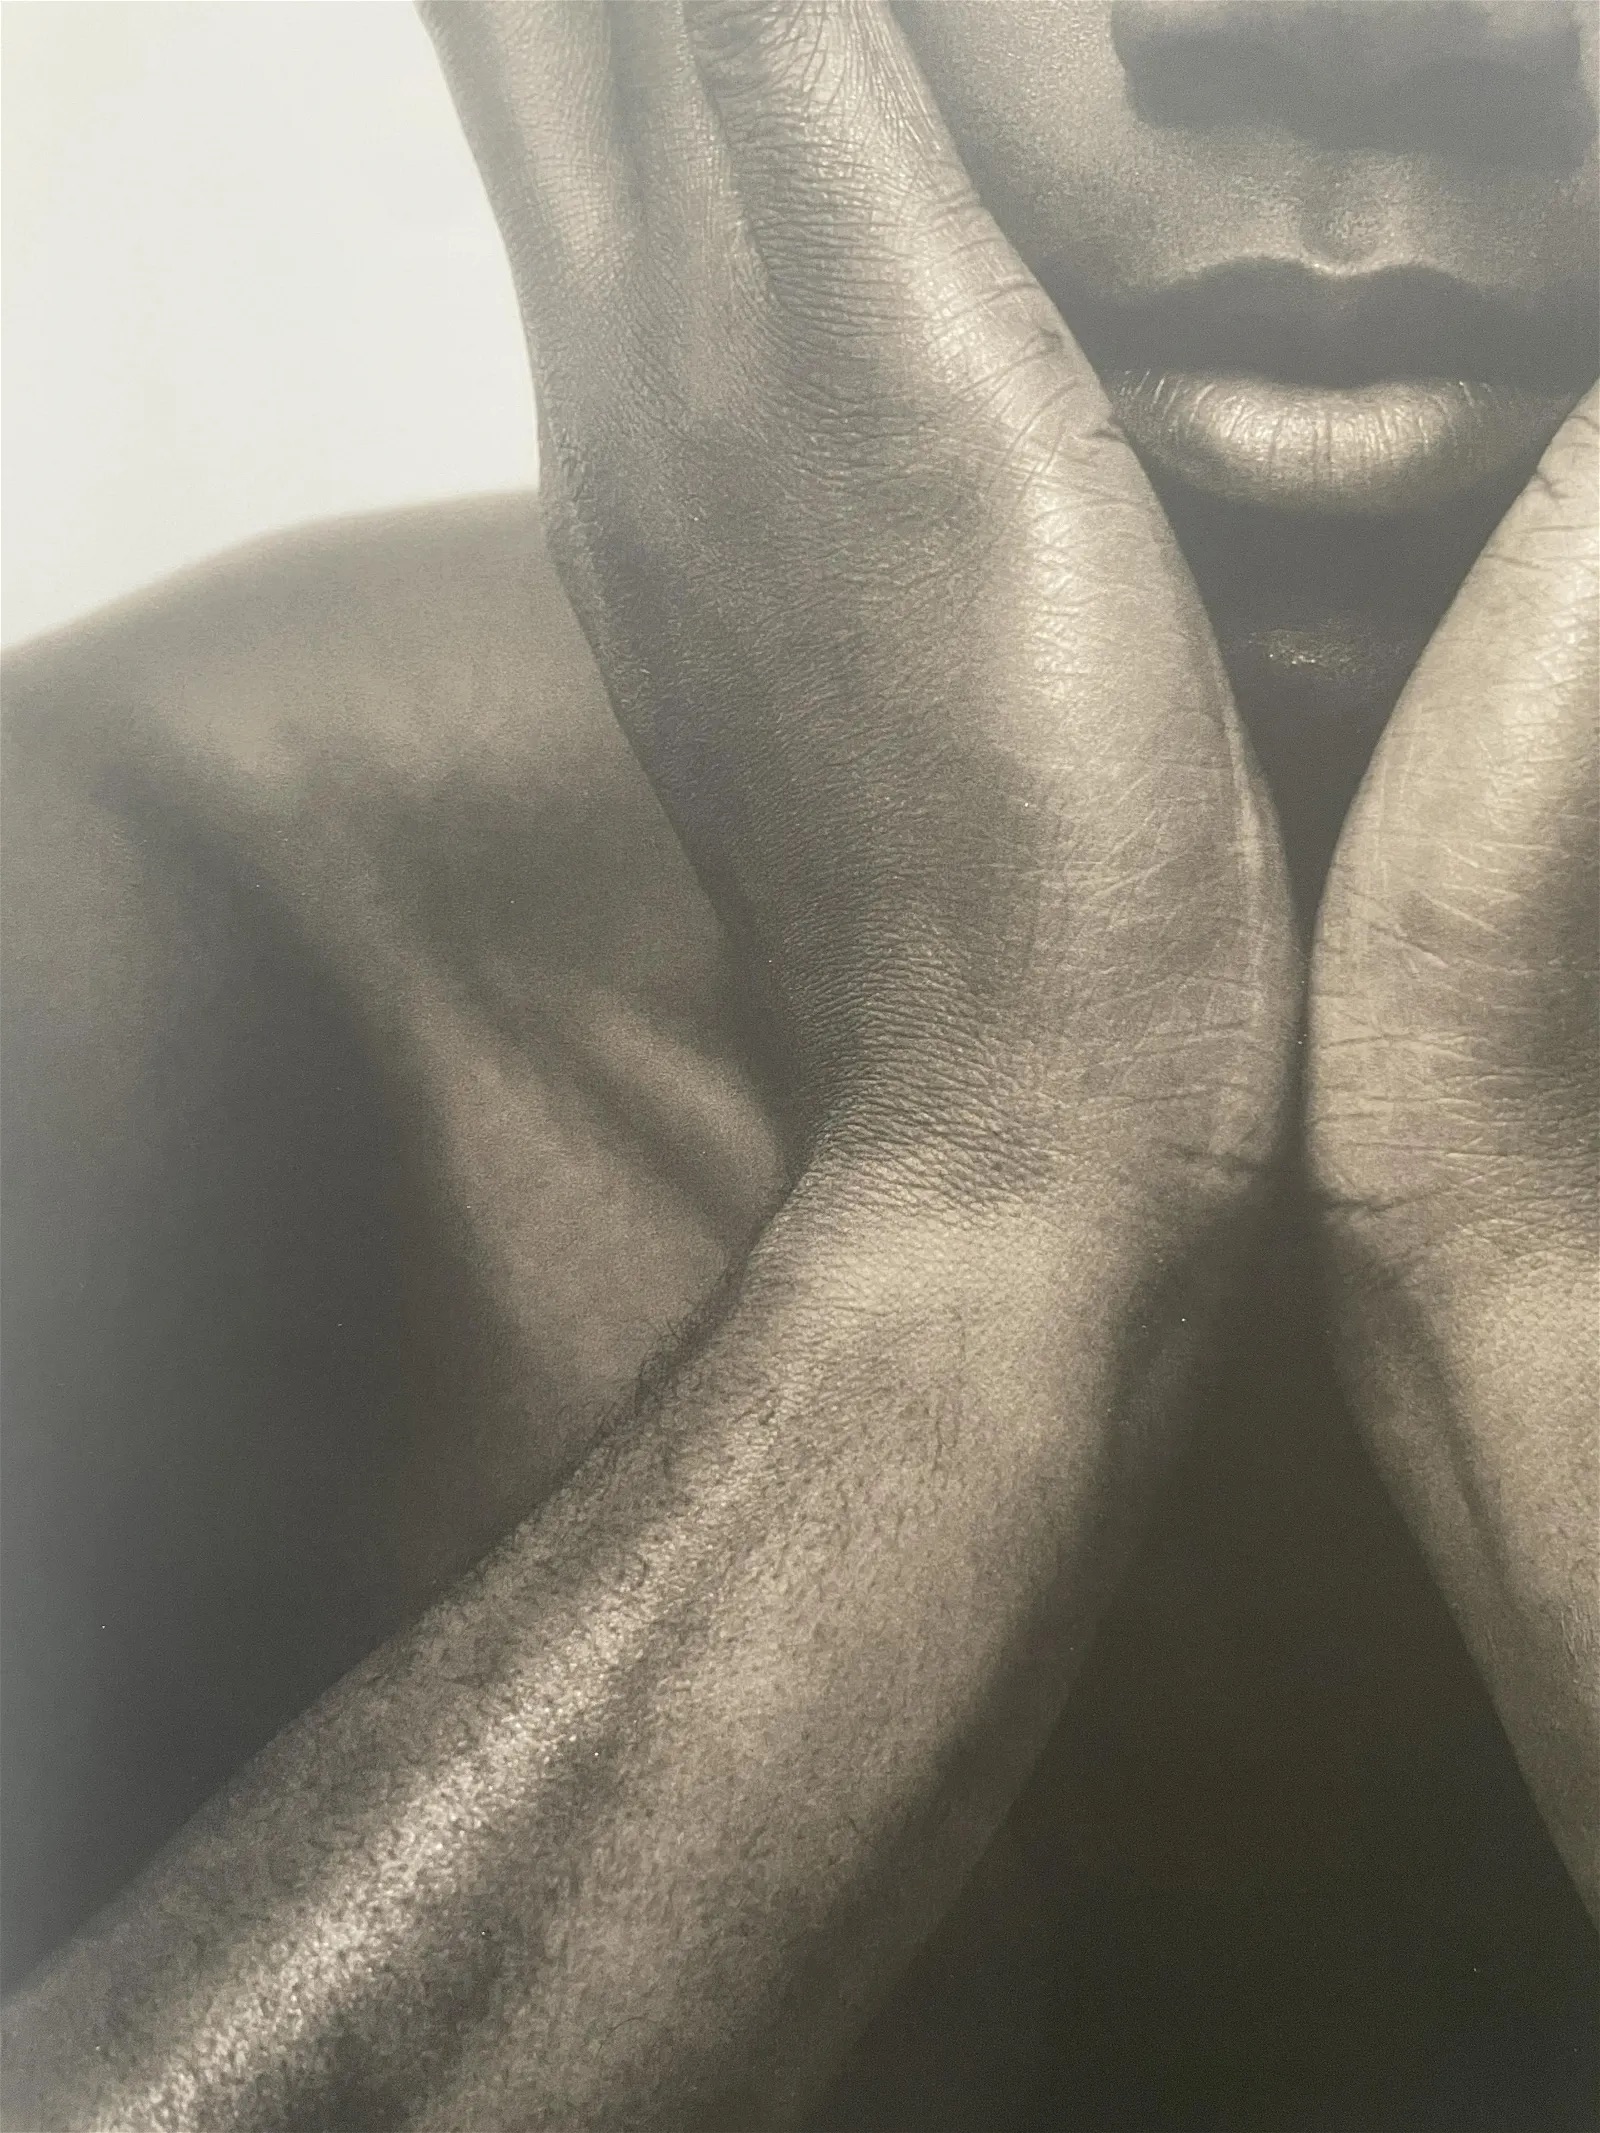 Herb Ritts "Earvin Magic Johnson, Hollywood, 1992" Print - Image 3 of 5